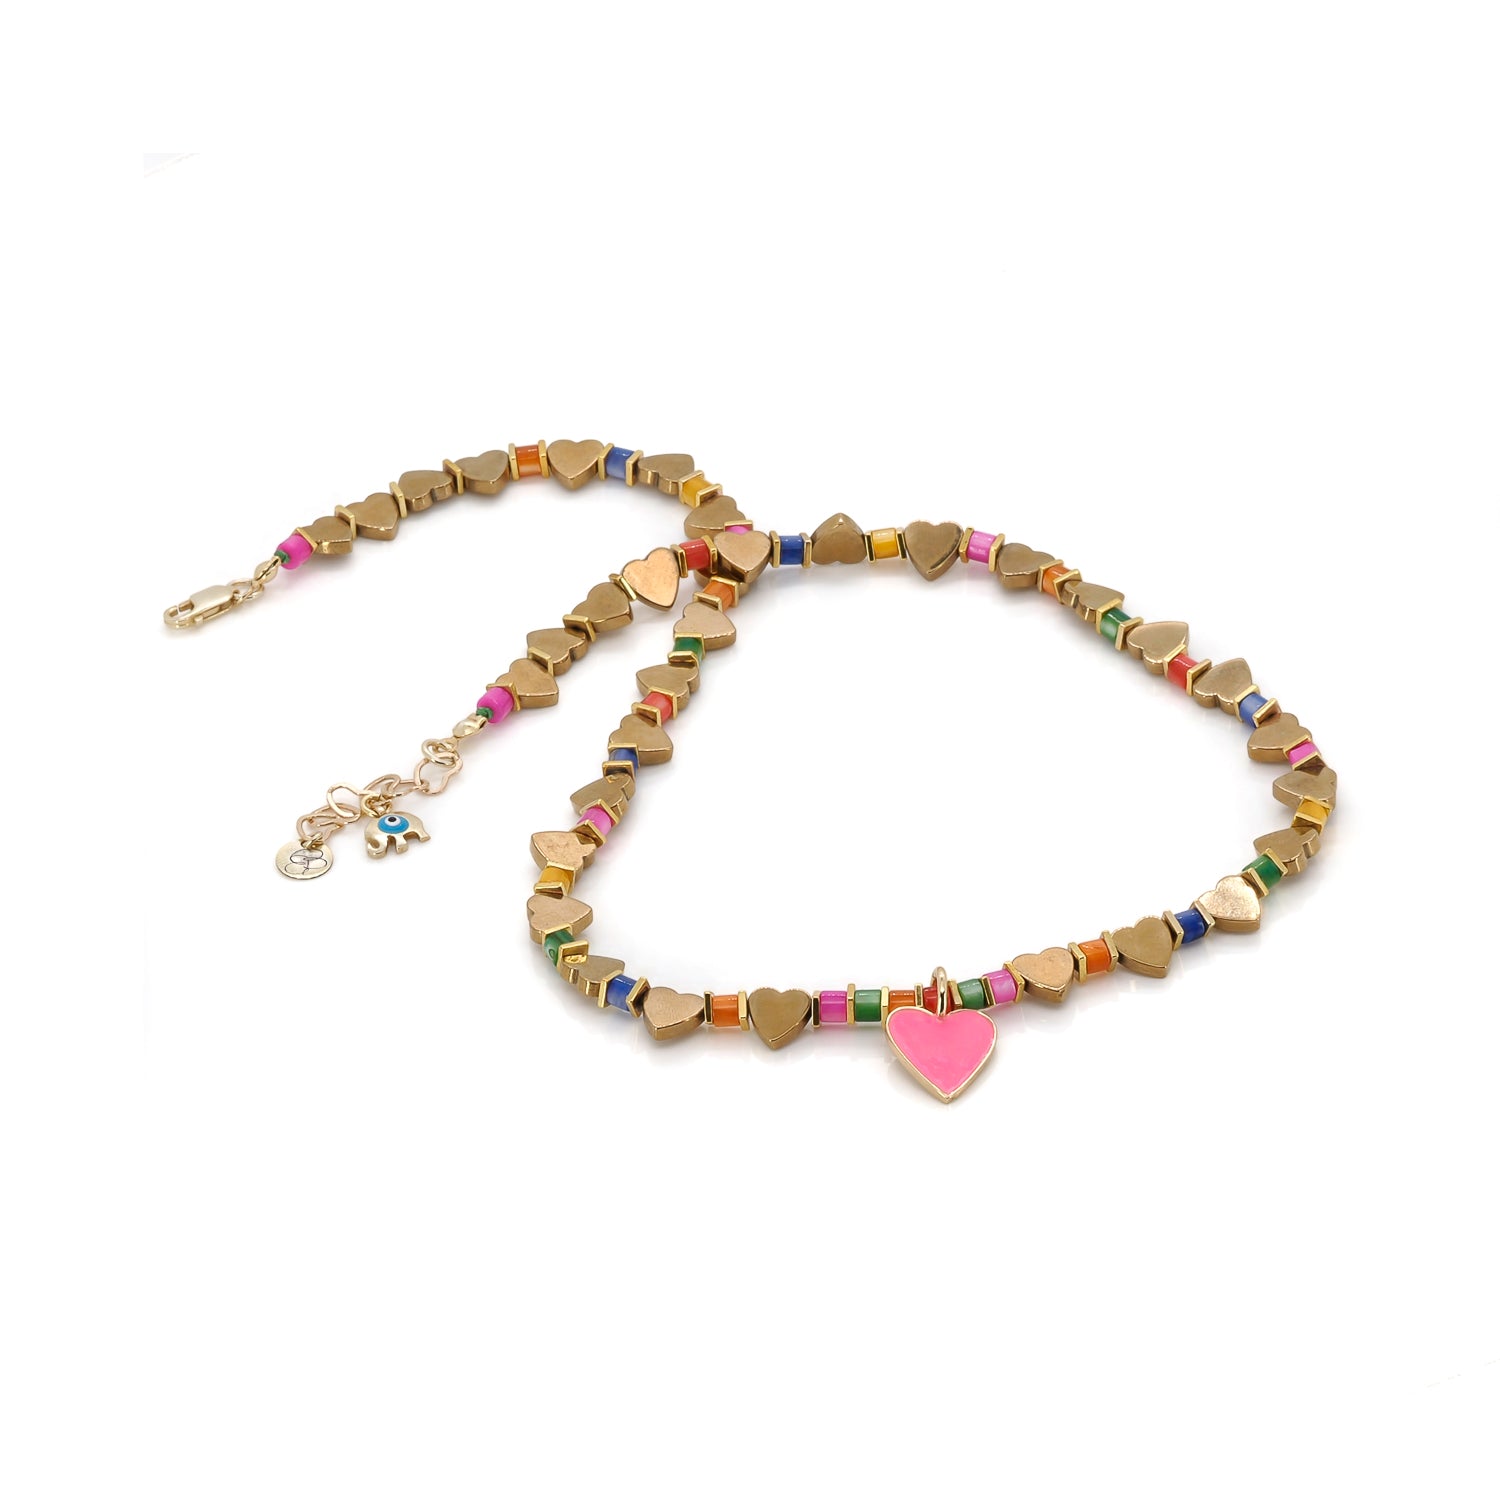 Colorful Necklace with Pink Heart Pendant and Pearl Stones